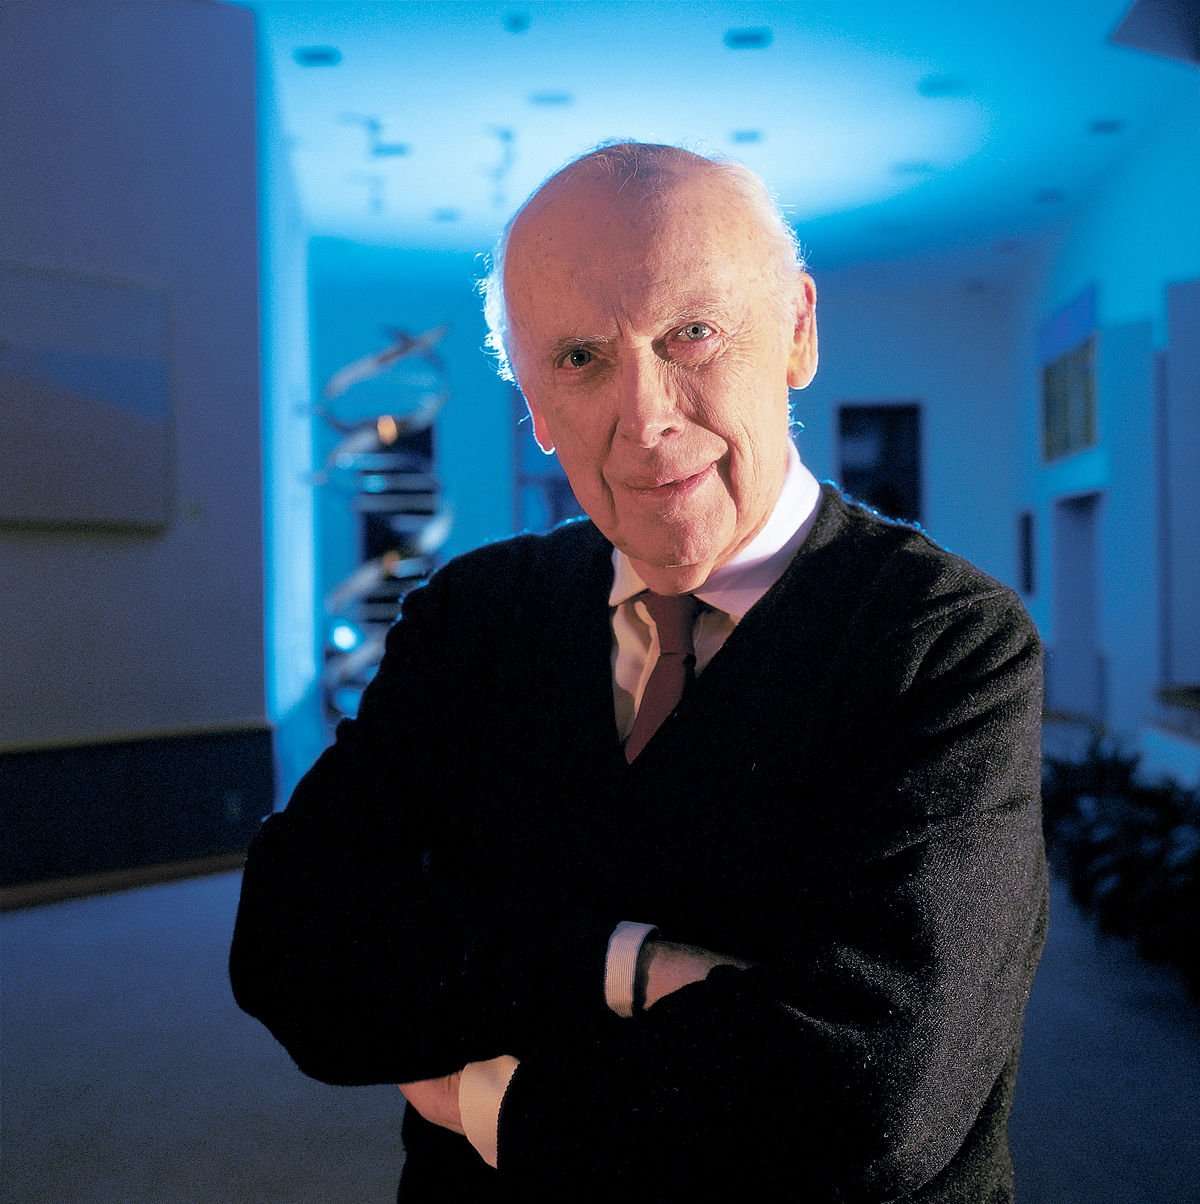 image for TIL Dr.James Watson, Nobel Prize winner &amp; co-discoverer of DNA's double helix structure, believed that babies shouldn't be considered alive until 3 days after birth so that if the baby is sick, disabled, deformed, or deemed otherwise unacceptable, the baby can be legally left to die or euthanized.